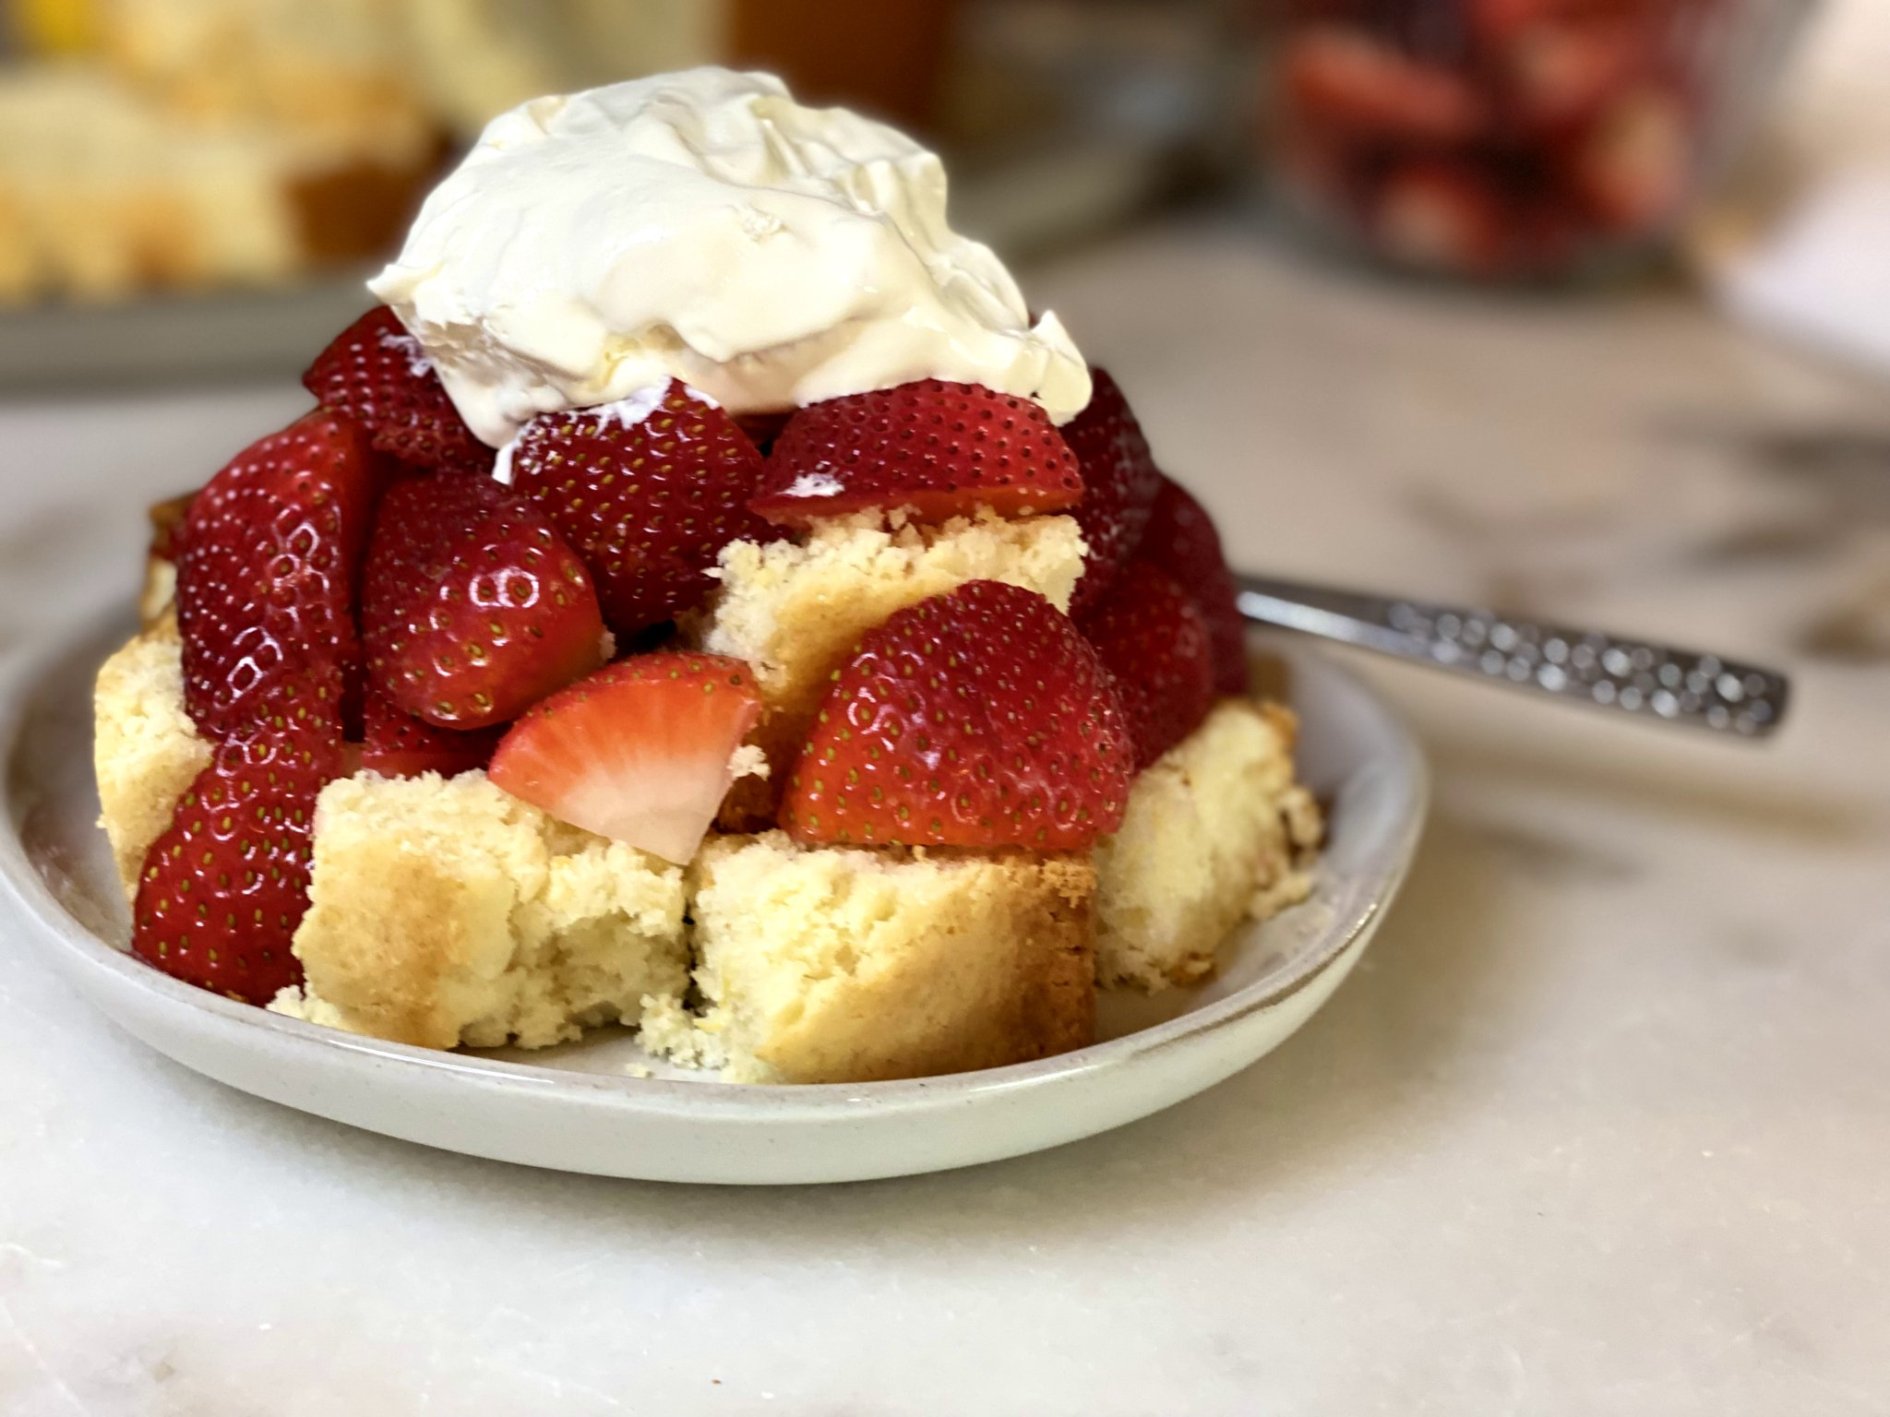 Pound Cake with Strawberries and Whipped Cream